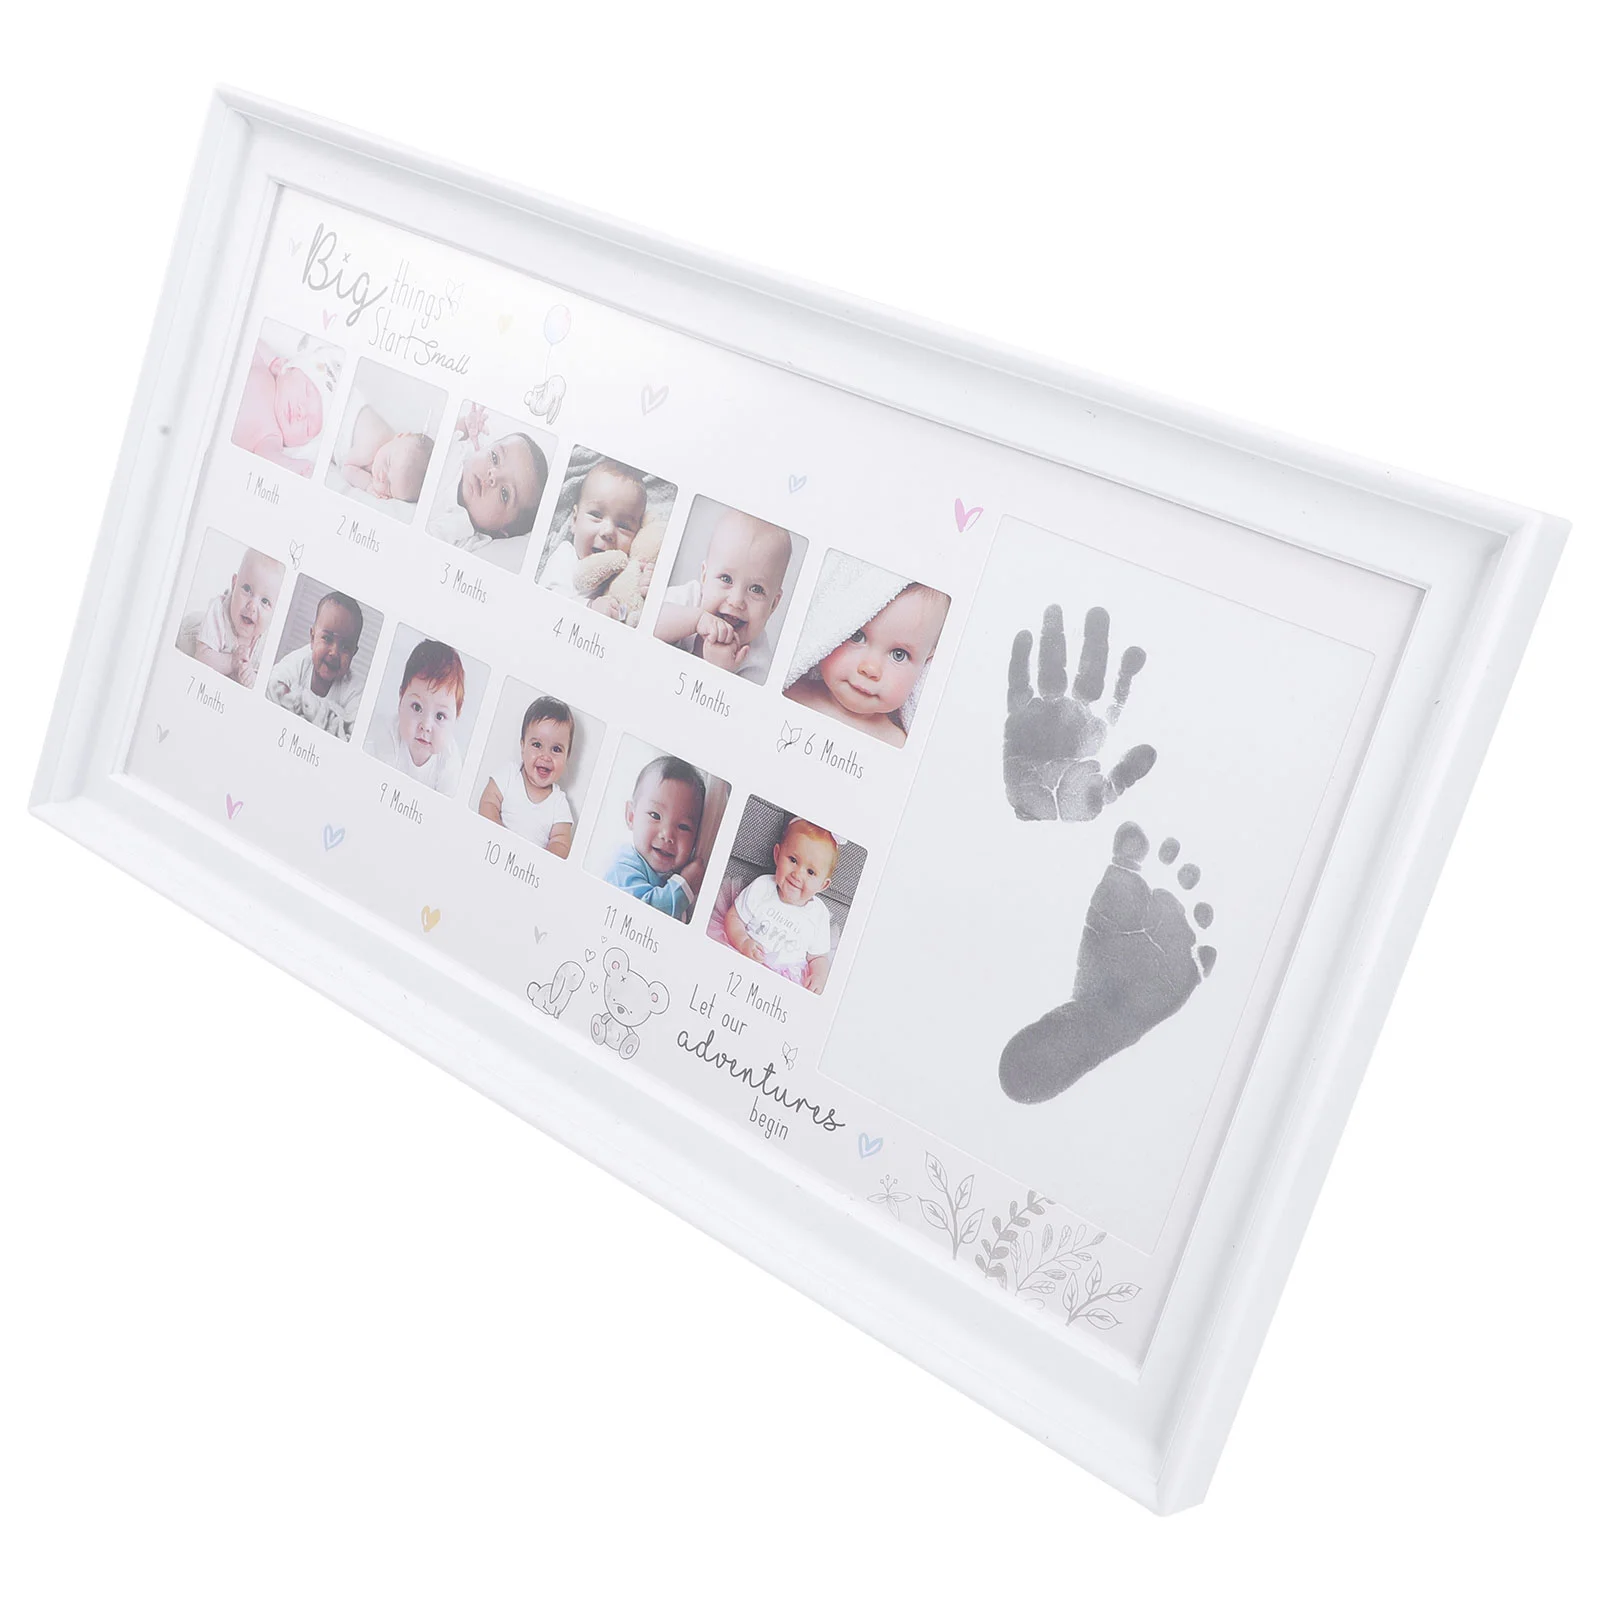 

Baby Growth Photo Frame First Year Holder 12 Month Picture The Gift Suite Book Collage Infant Wood Memories Gifts